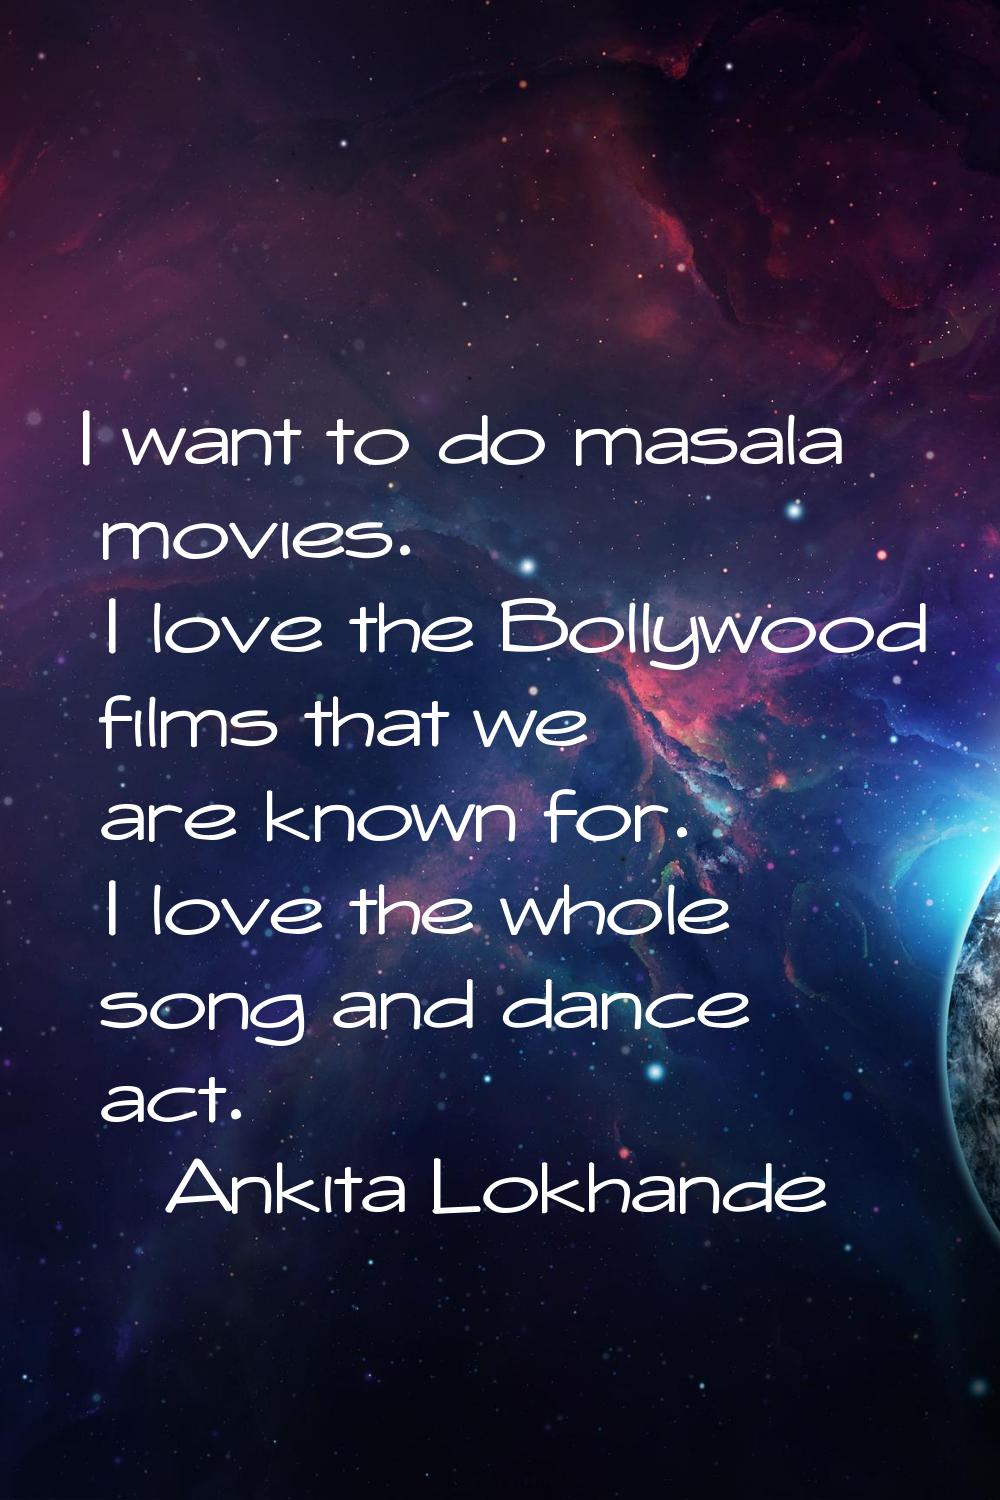 I want to do masala movies. I love the Bollywood films that we are known for. I love the whole song